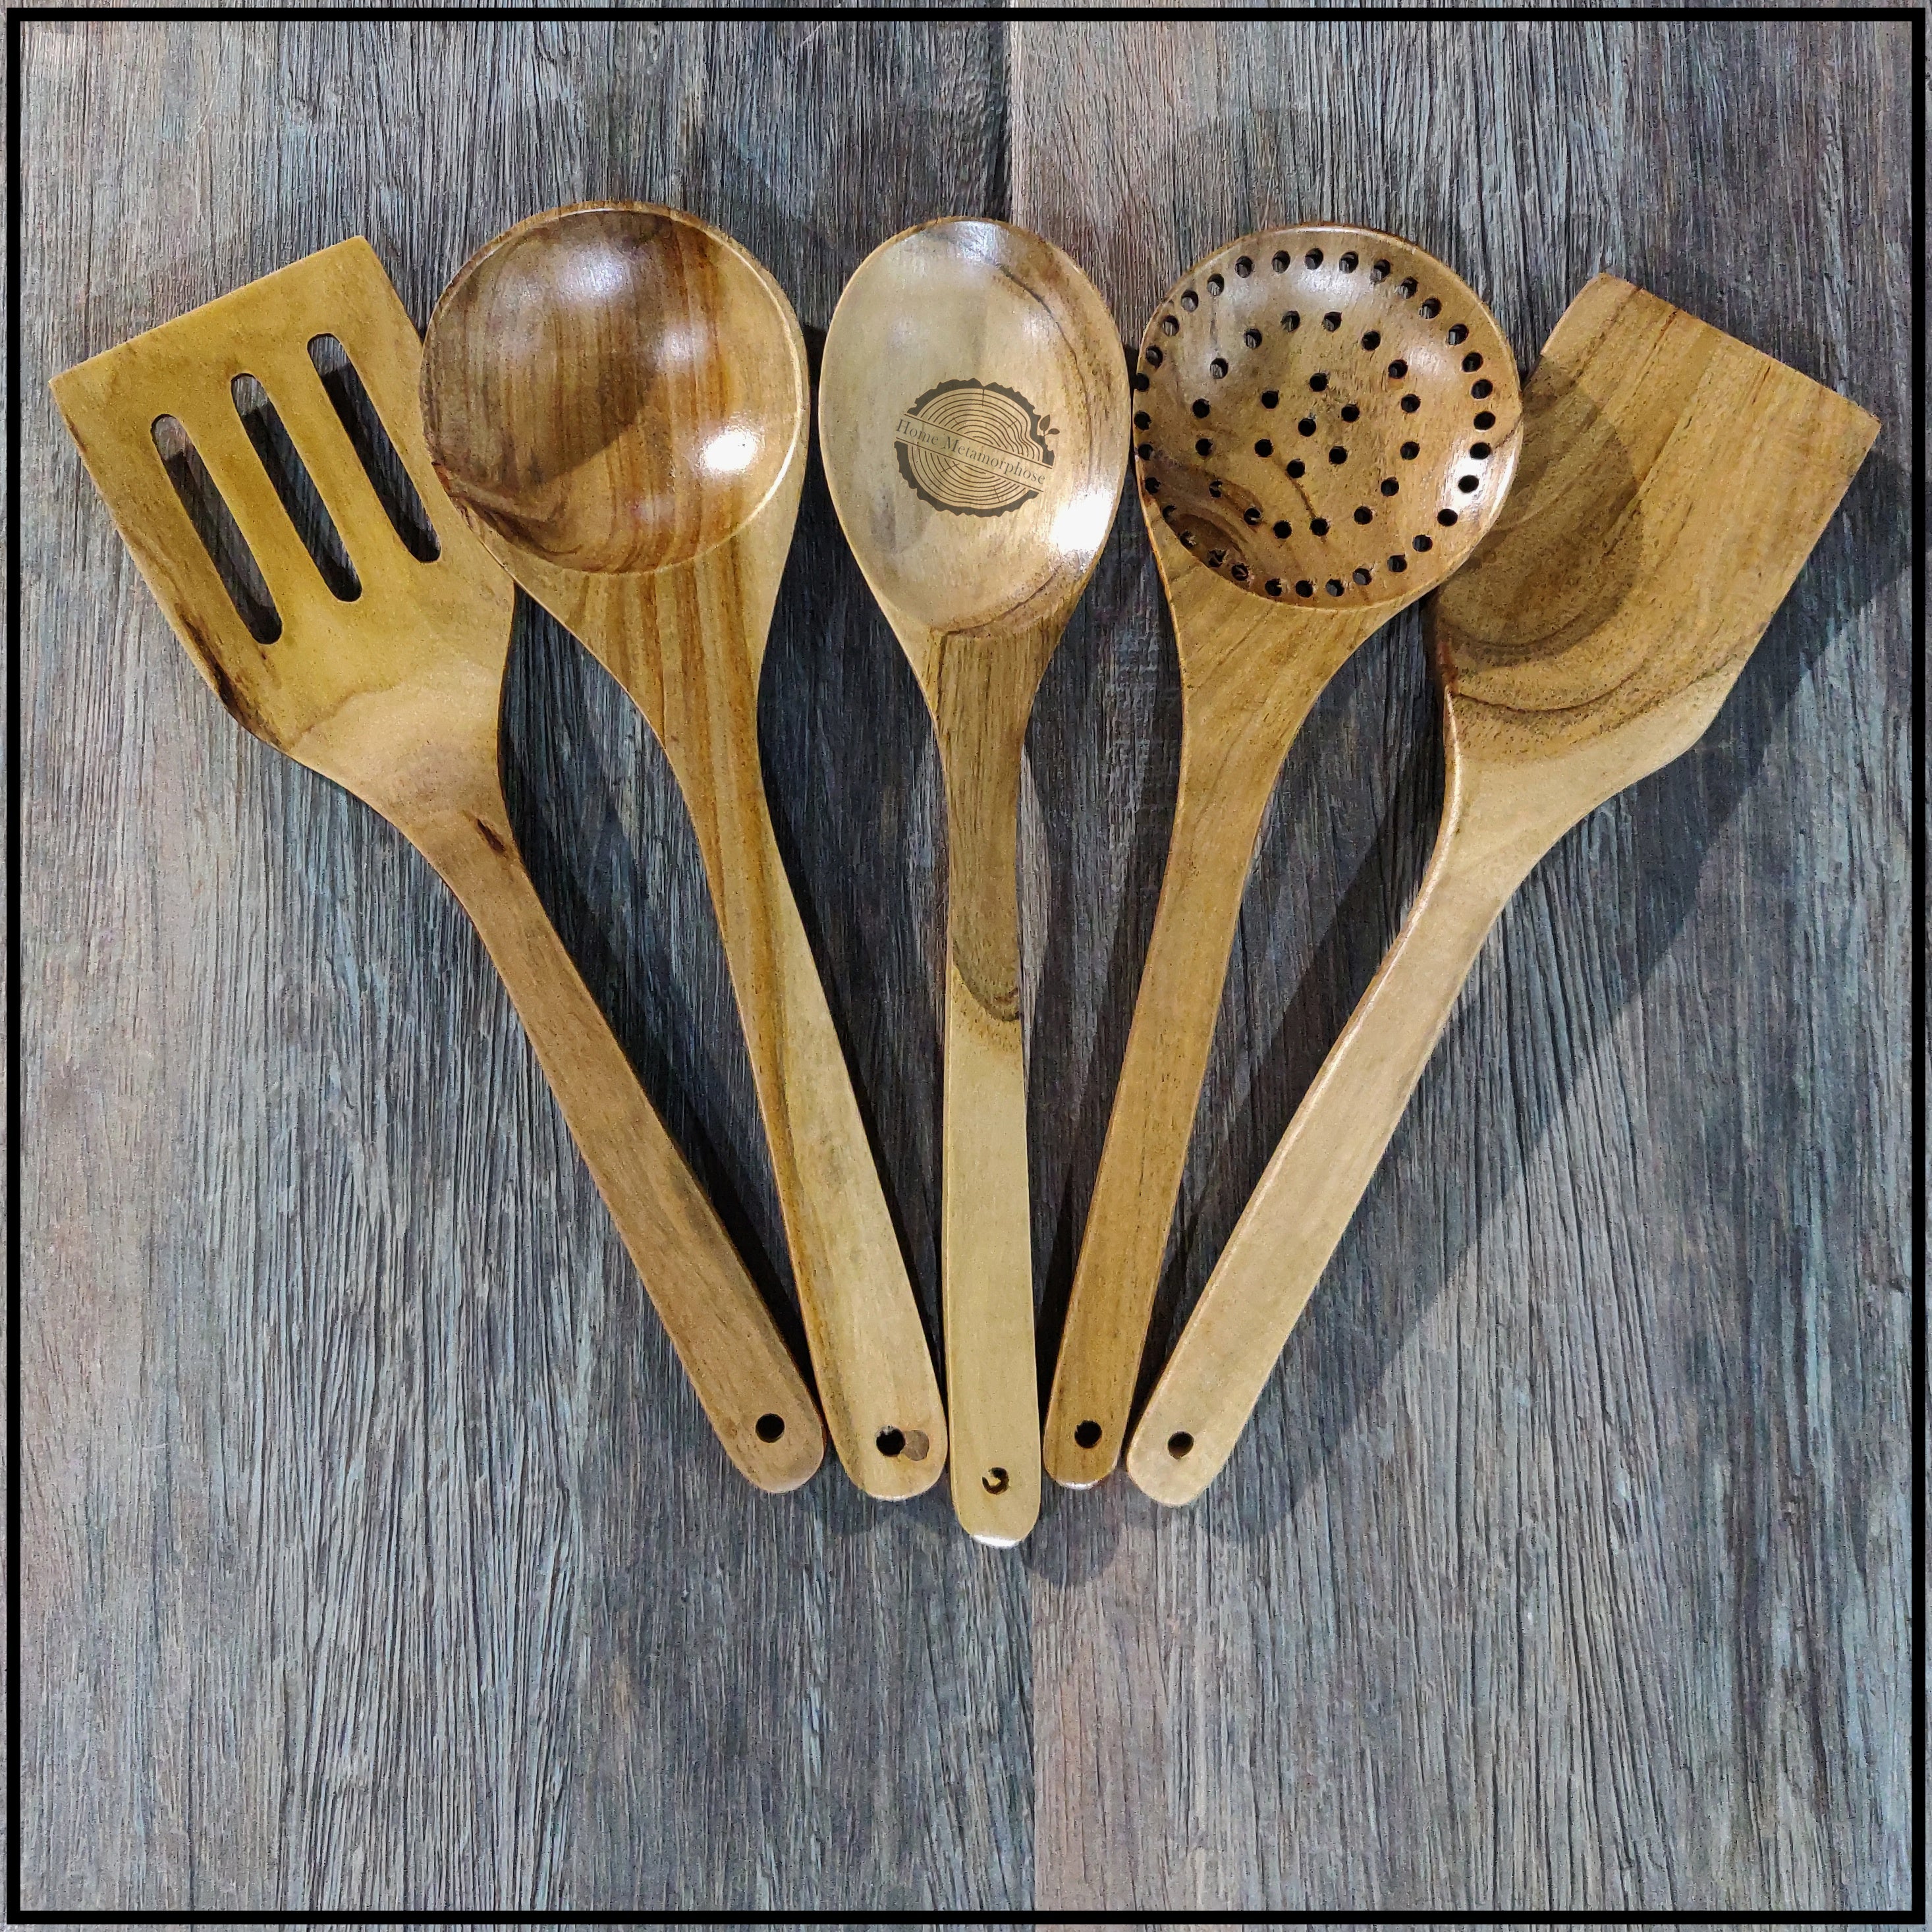 Spoon Set of 5,Wooden Spoons for Cooking, Wood Spoon Set of 5, Kitchen Serving Ladle Scoop Utensil, Heat Resistant Nonstick Cookware Server Spoon, Stirring Food, Mixing Salad, Easy to use